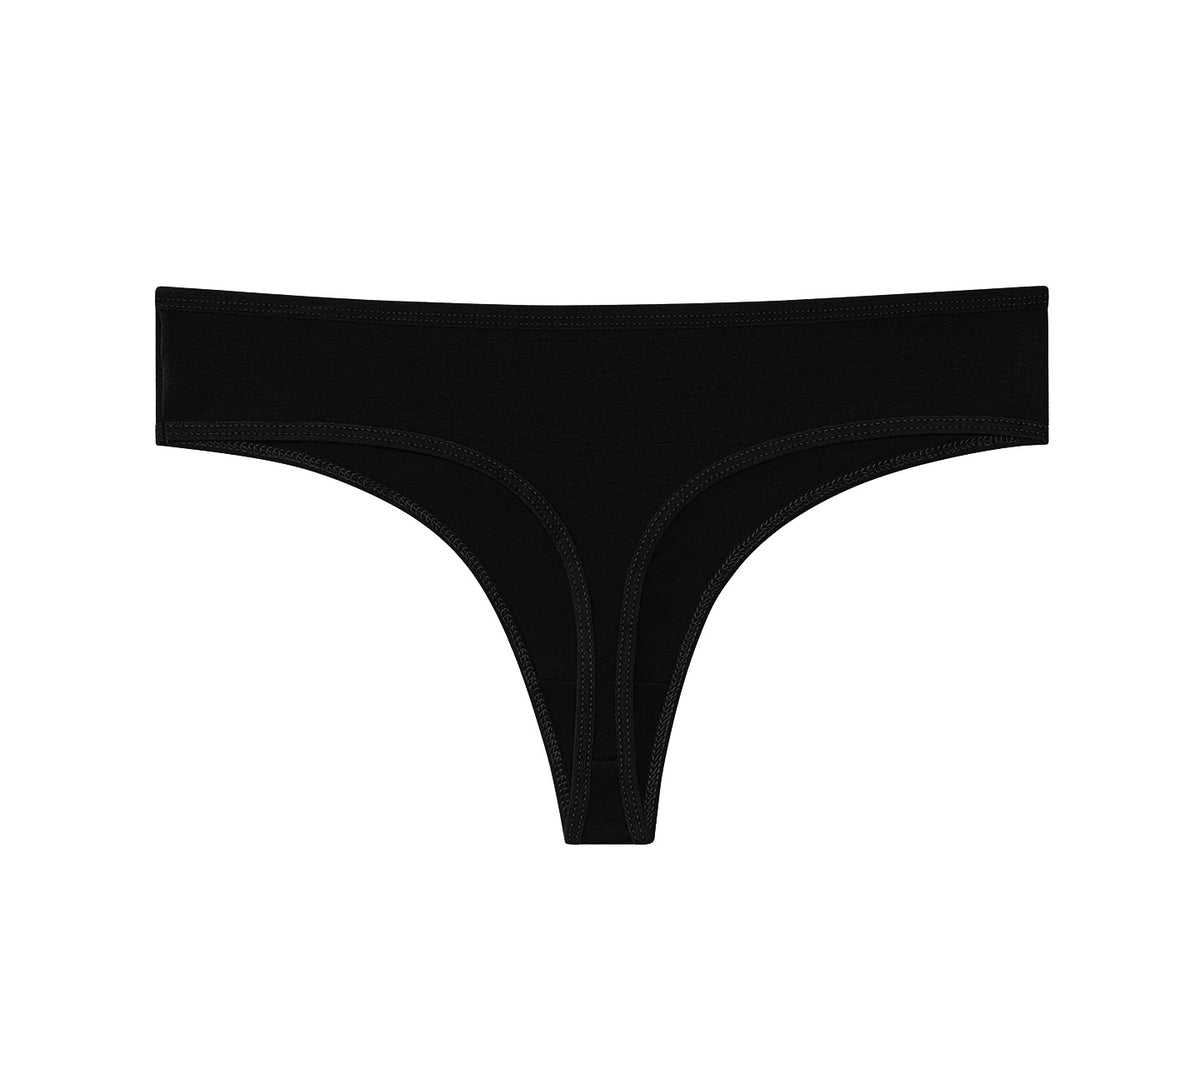 Buy Low Waist Thong in Black - Cotton Online India, Best Prices, COD -  Clovia - PN1155P13